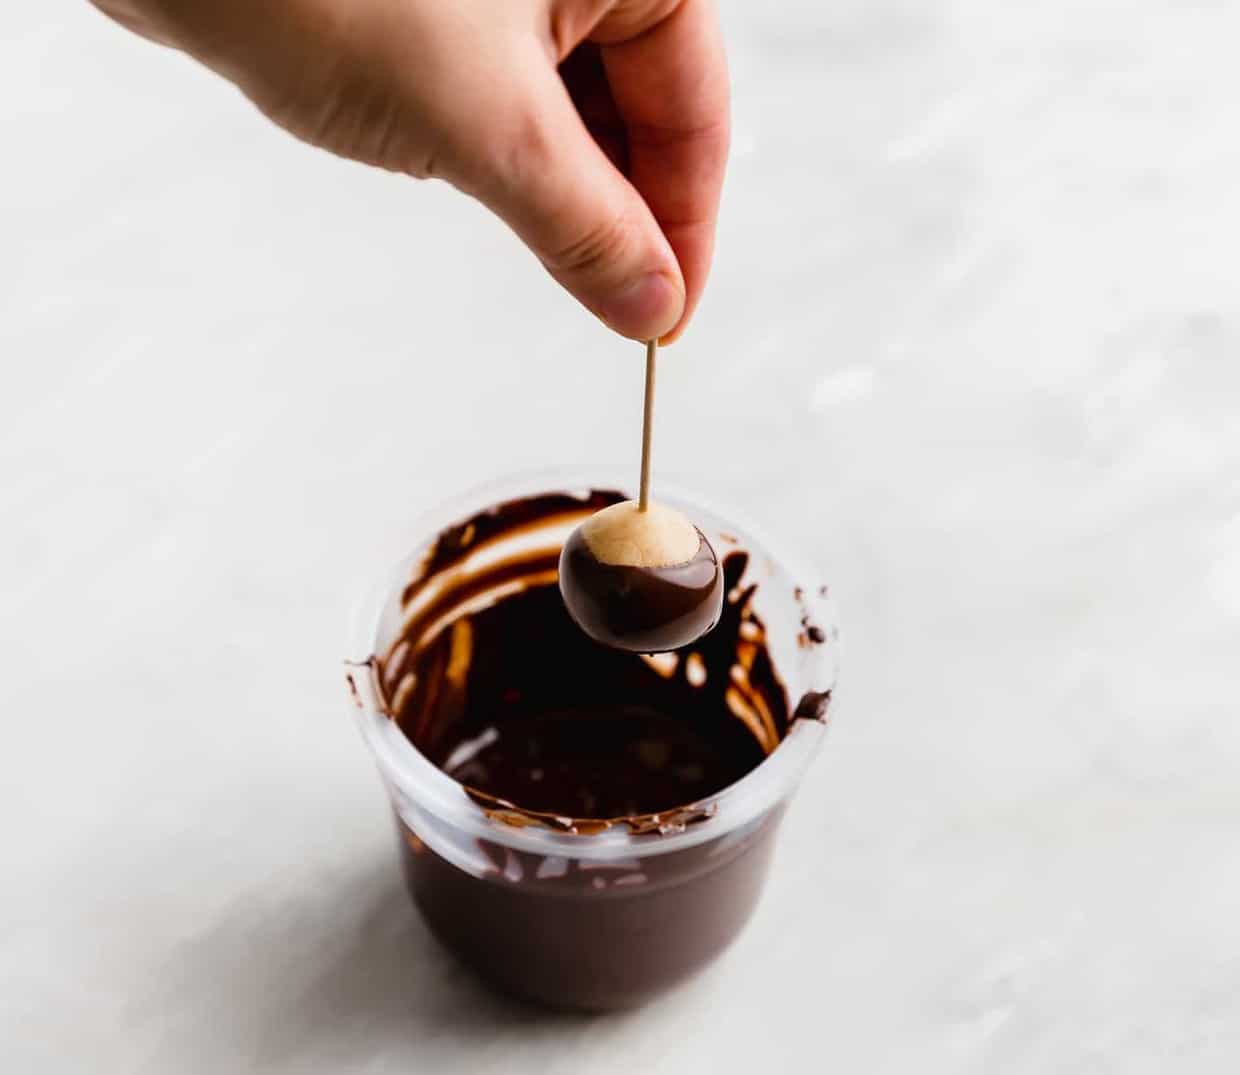 A hand dipping a buckeye into melted chocolate.